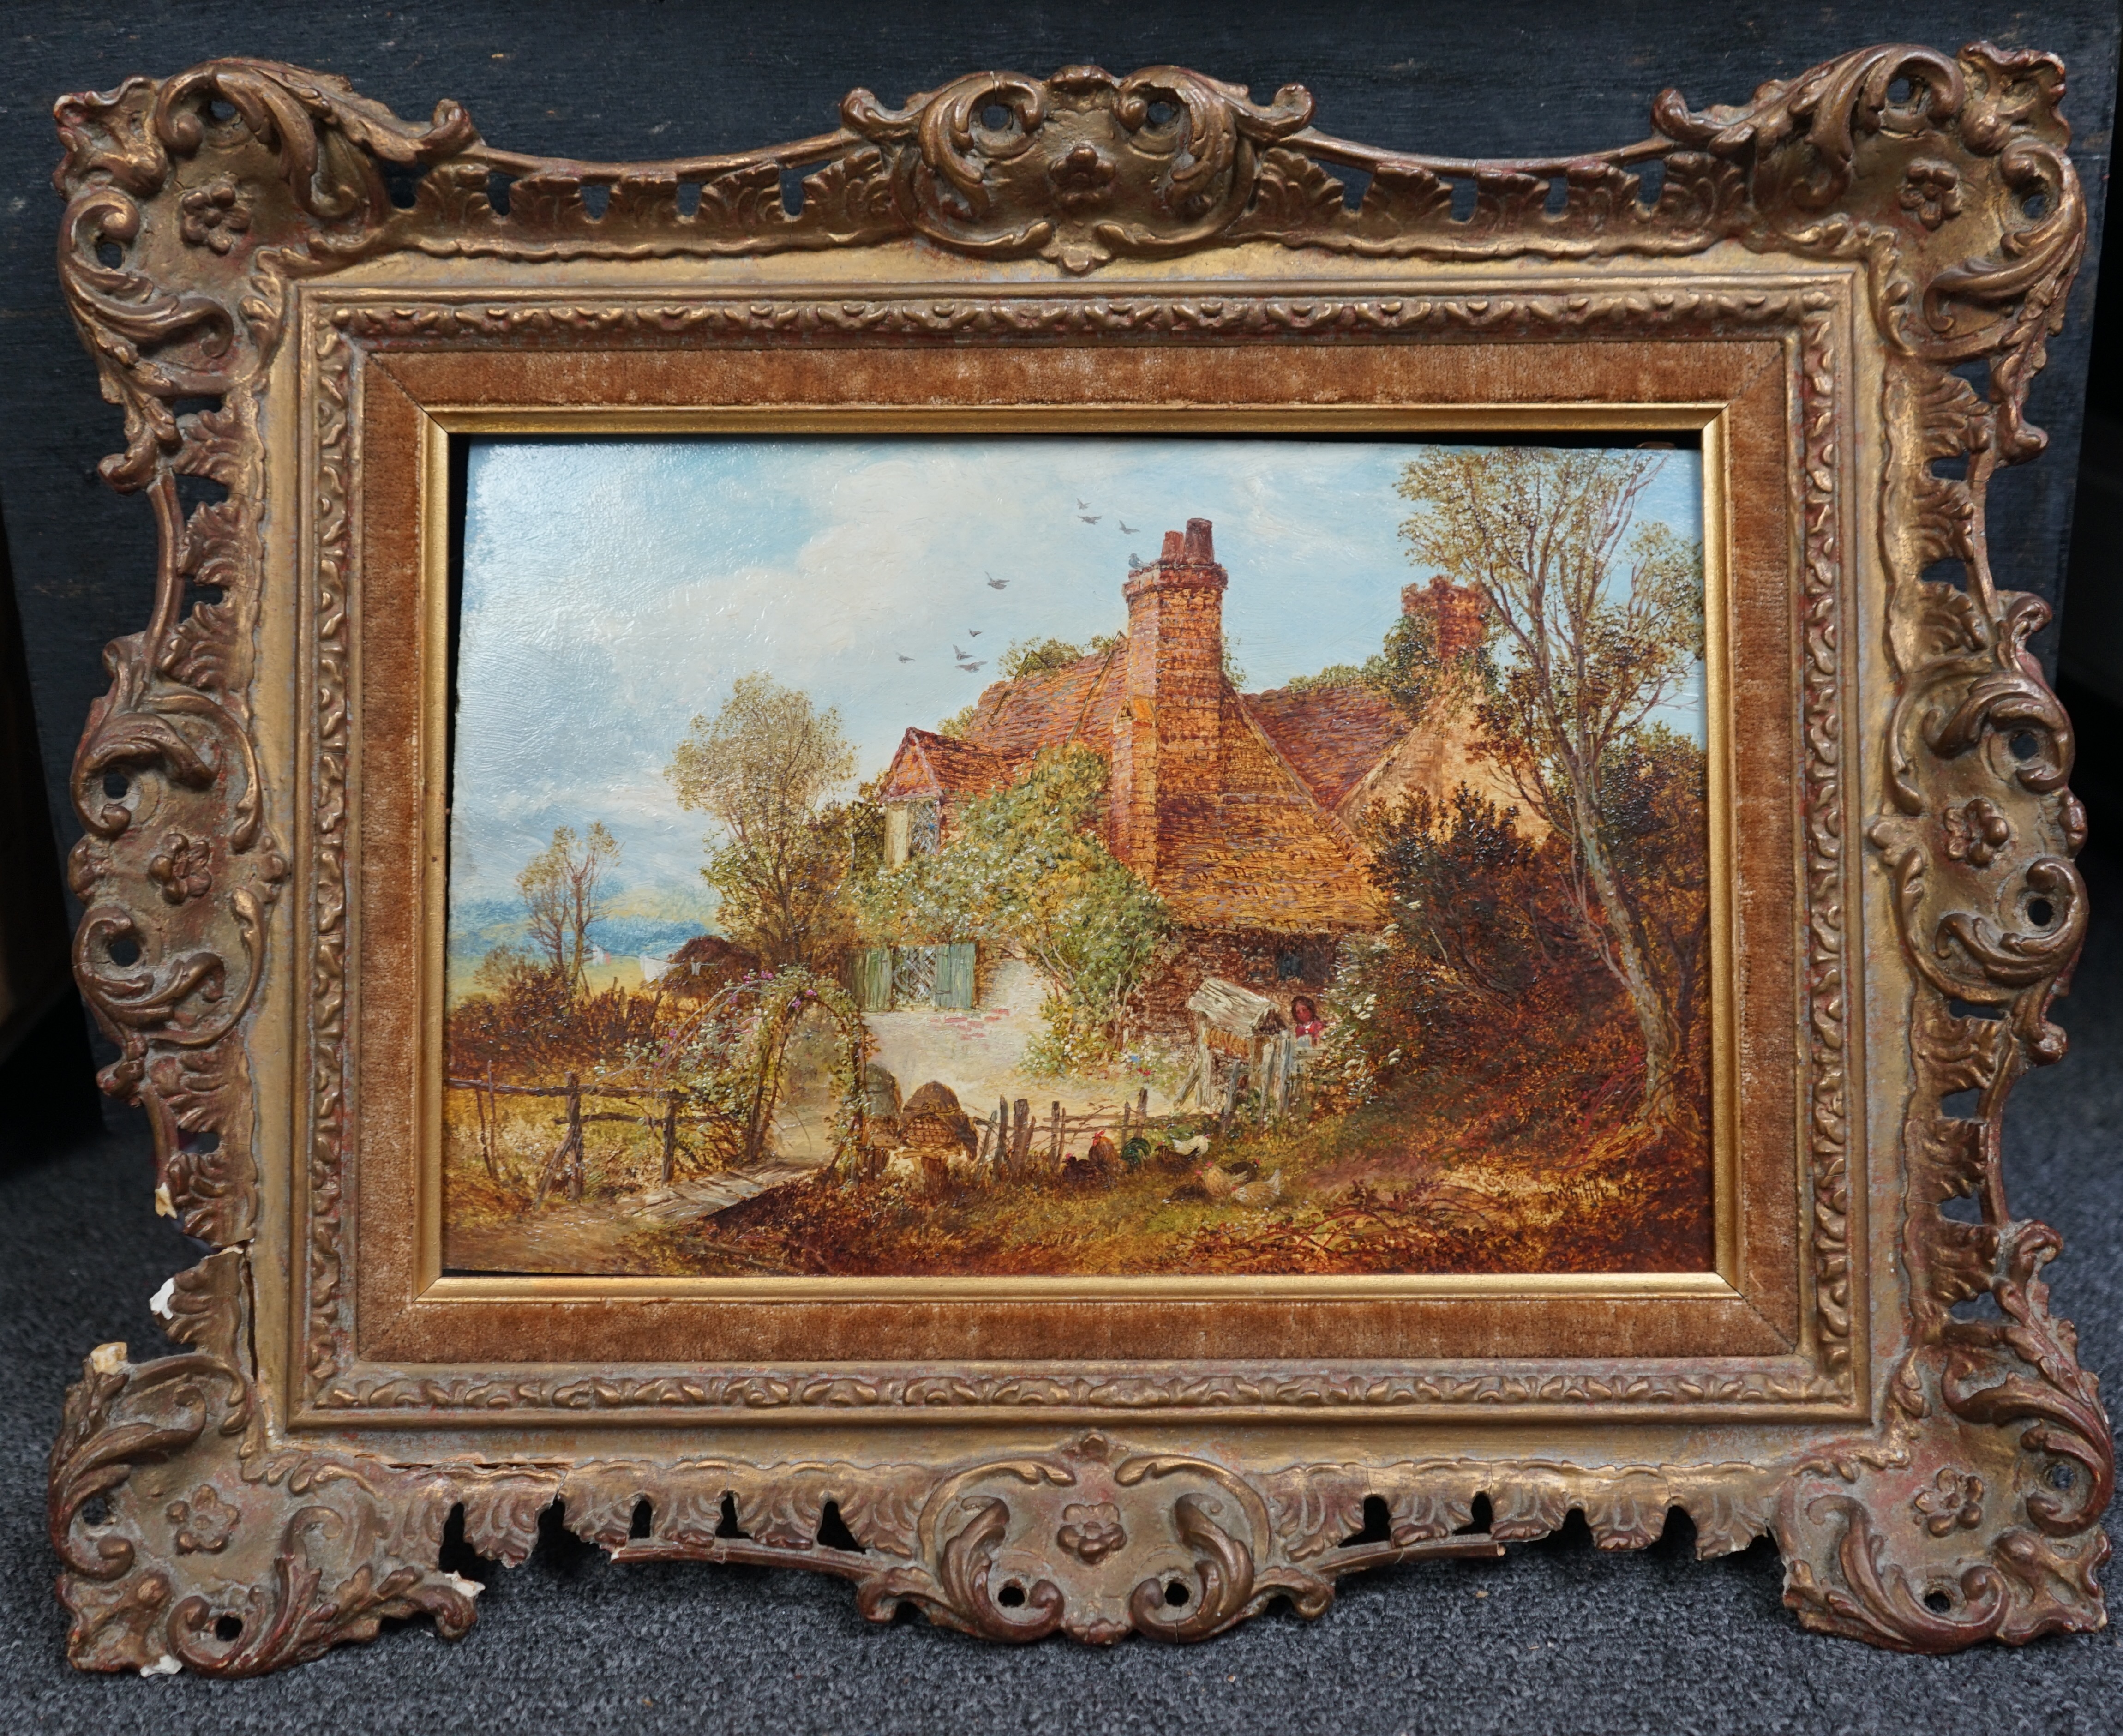 Thomas Whittle Junior (British 1865-1892), oil on millboard, Figure beside a rustic cottage, signed and dated 1876, 20 x 30cm. Condition - good, some damage to frame